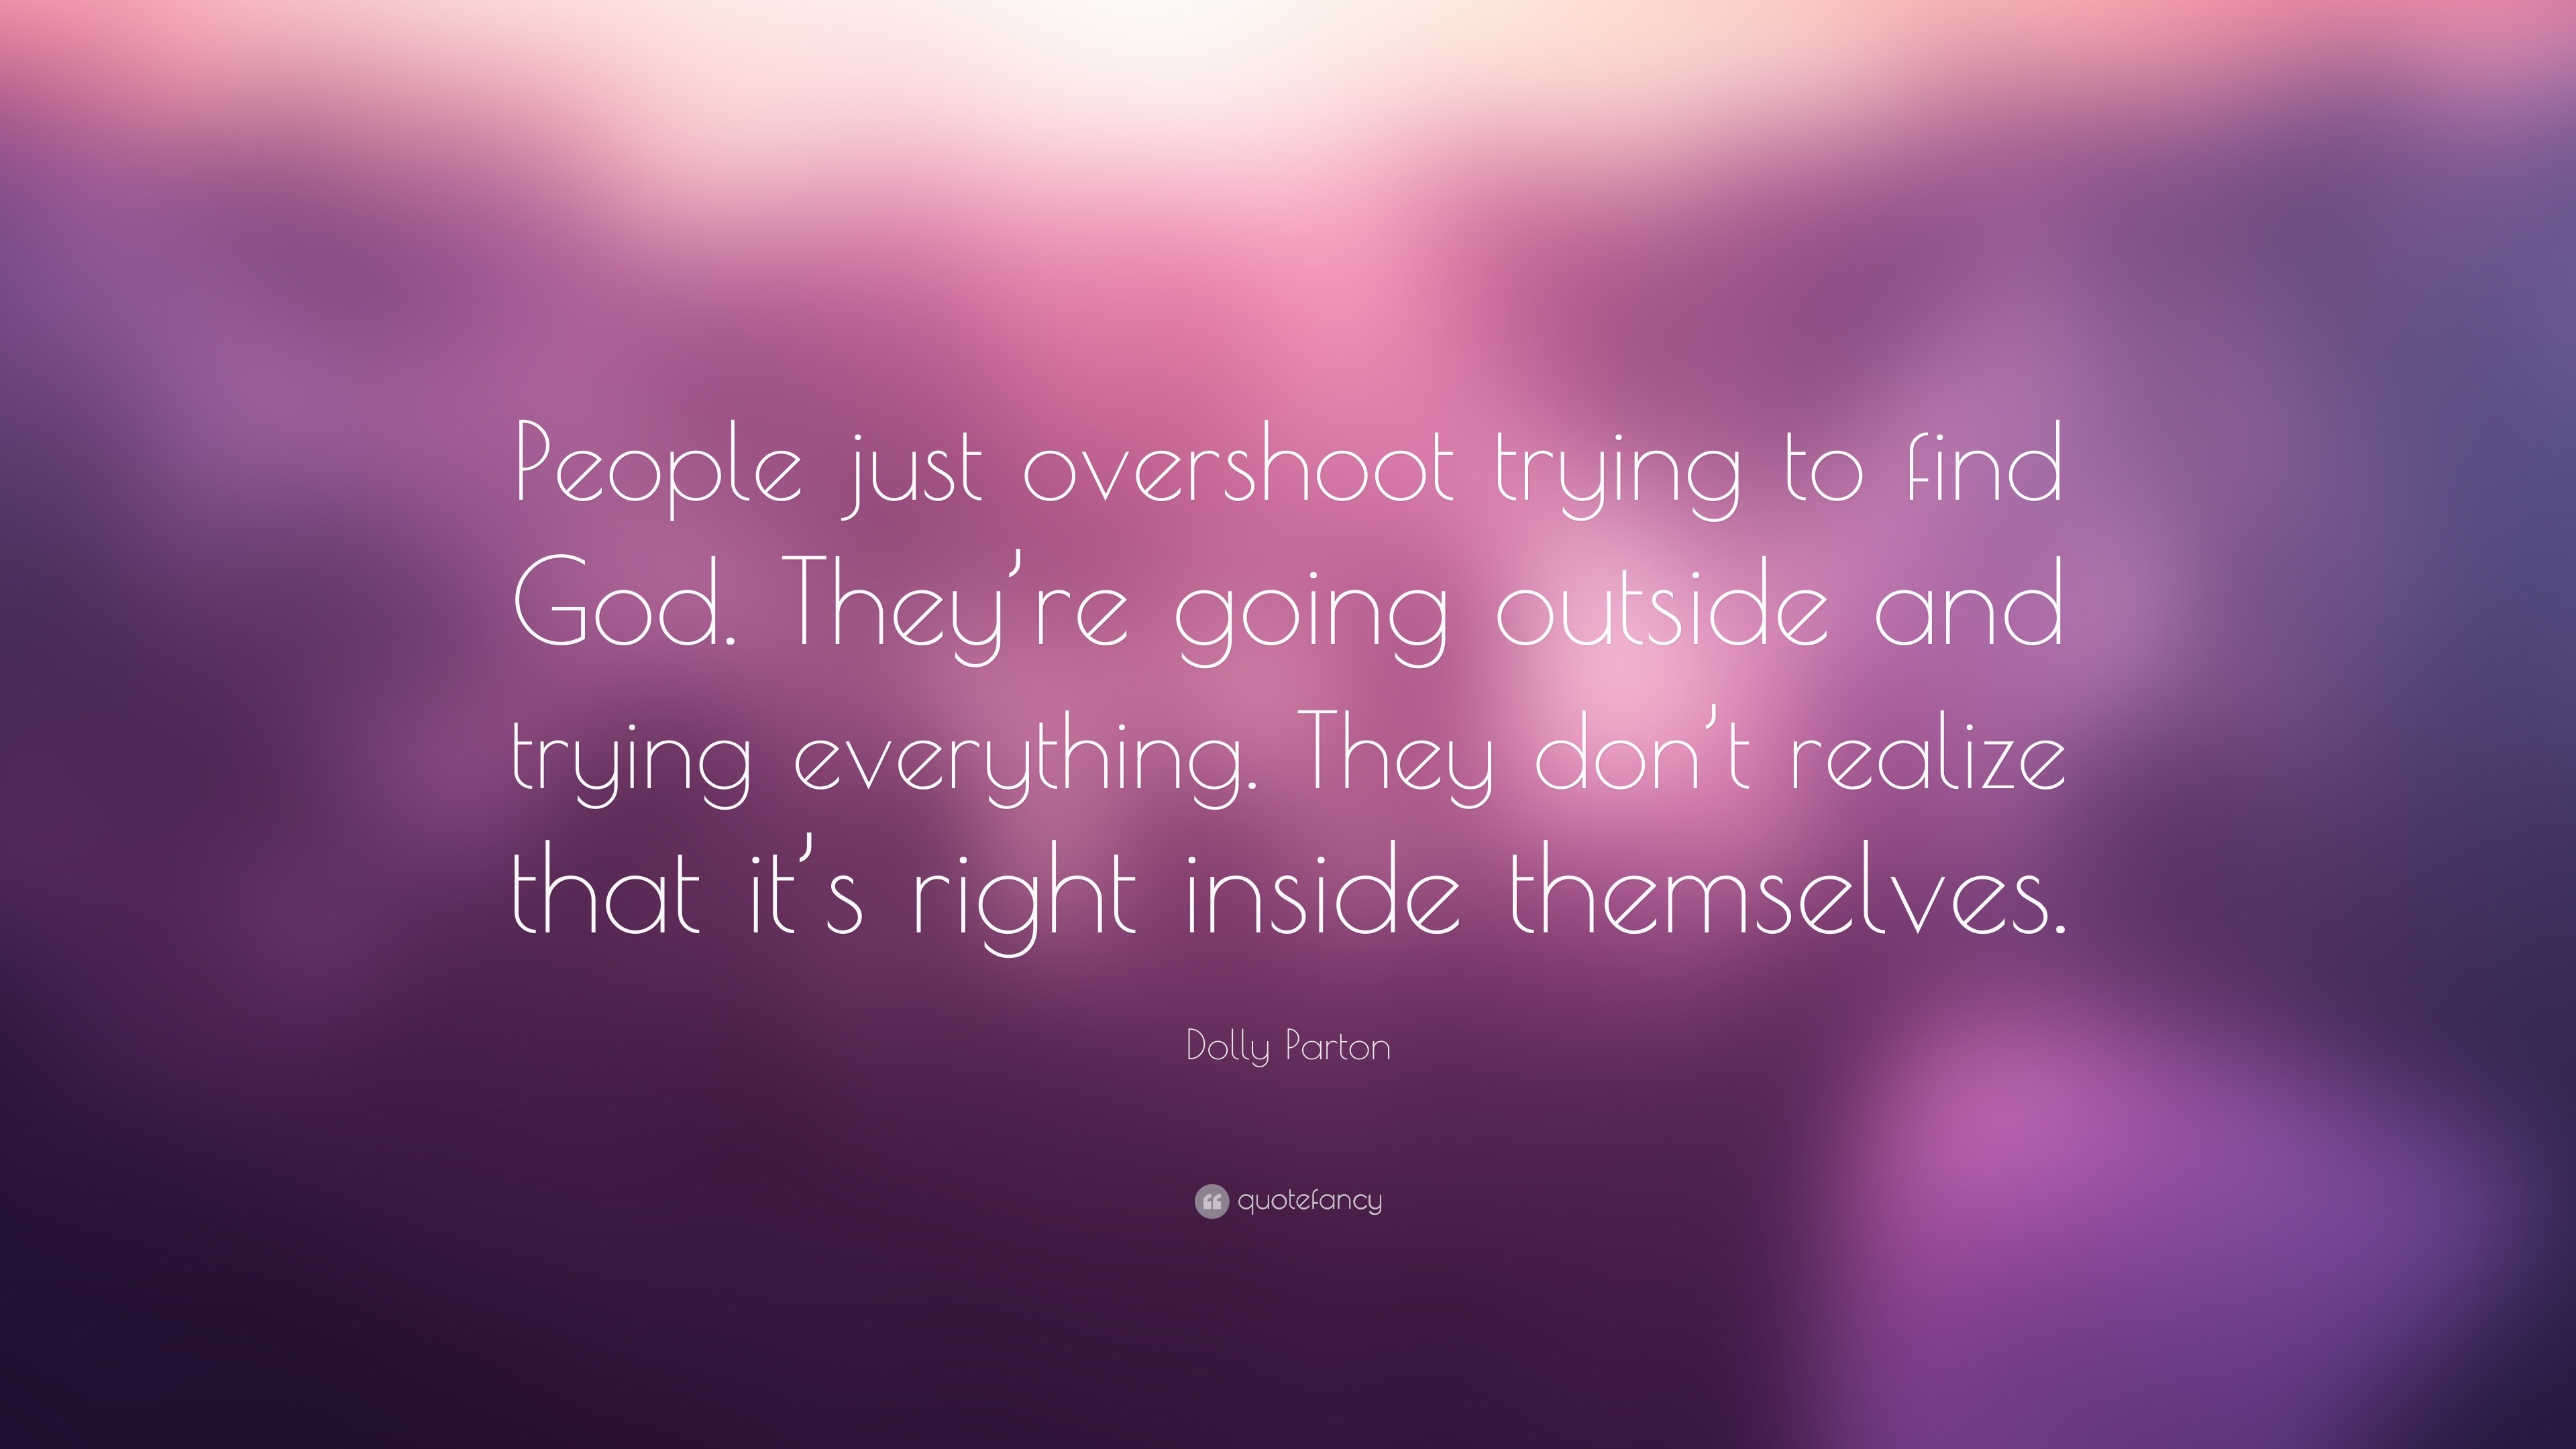 Dolly Parton Quote: “People just overshoot trying to find God. They’re ...